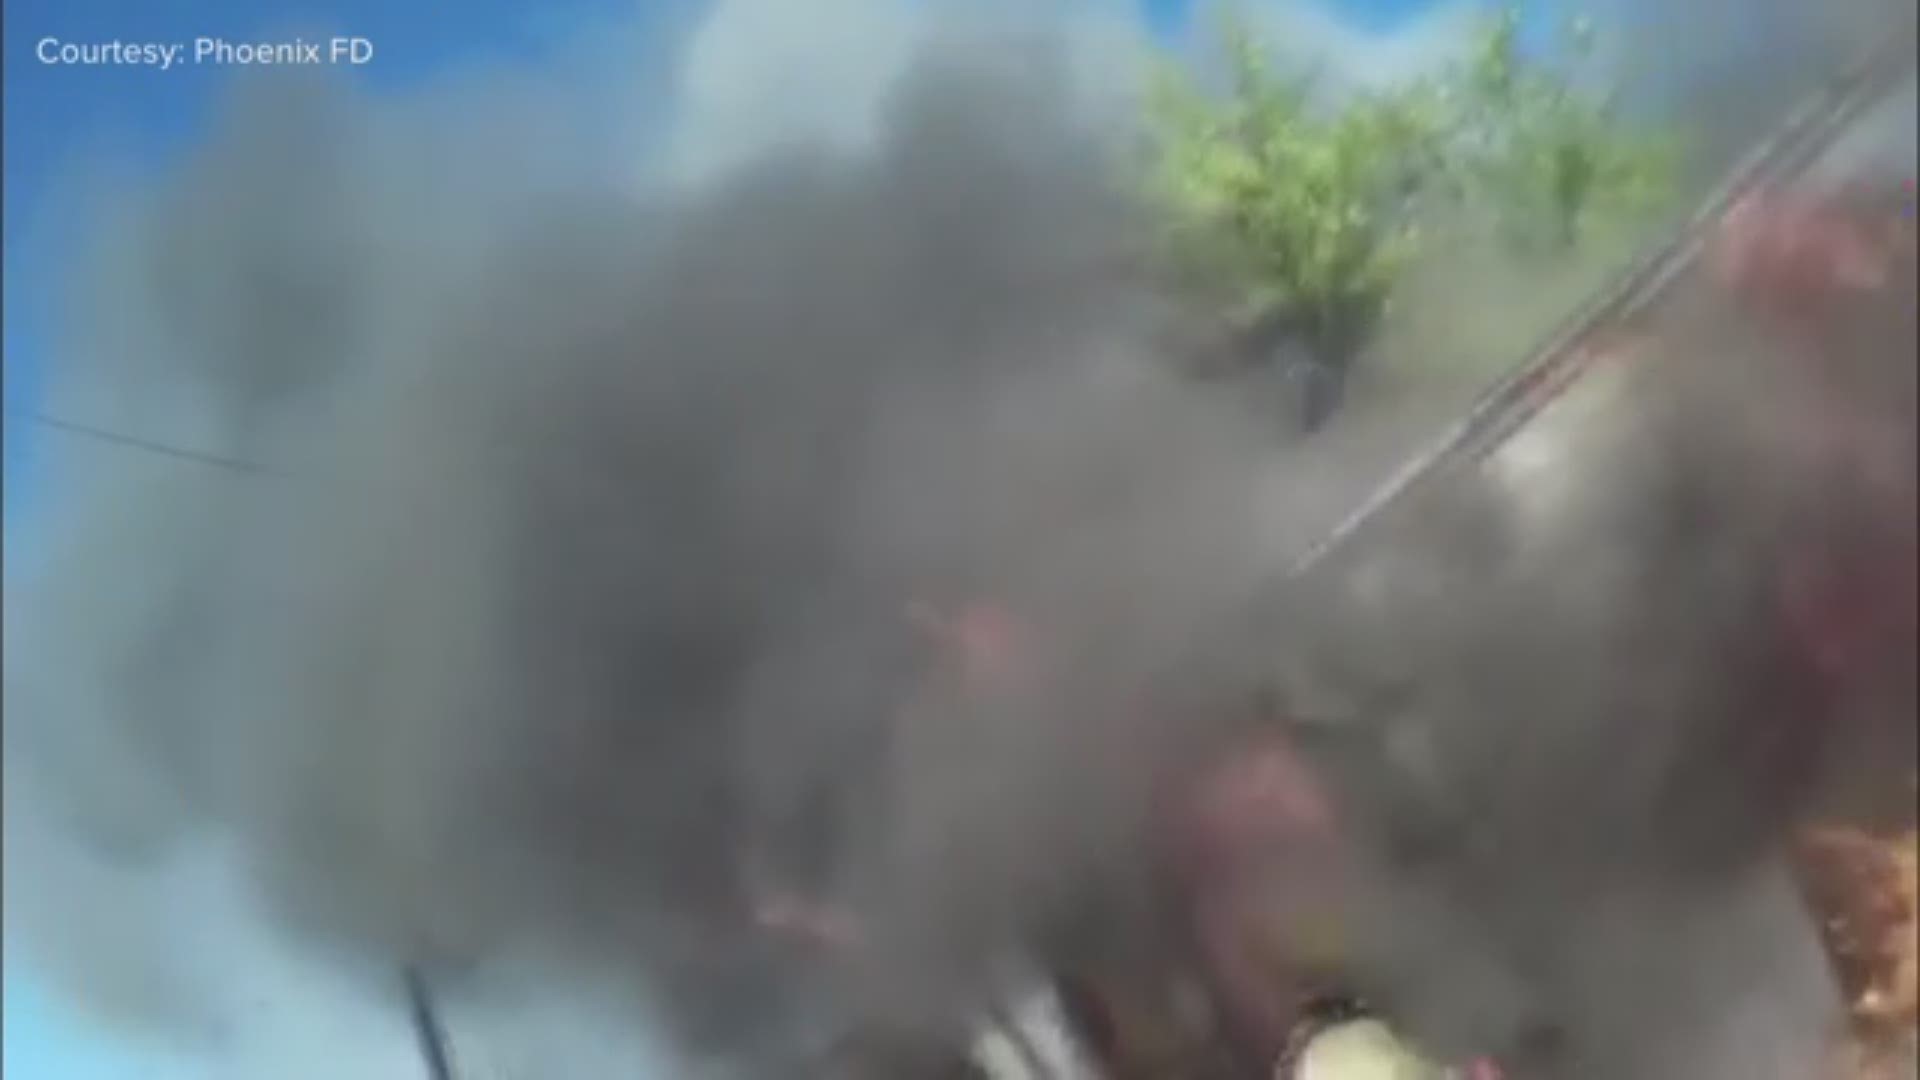 The helmet cam of a Phoenix Fire captain captured a heated moment as crews battled a mobile home fire Sunday.